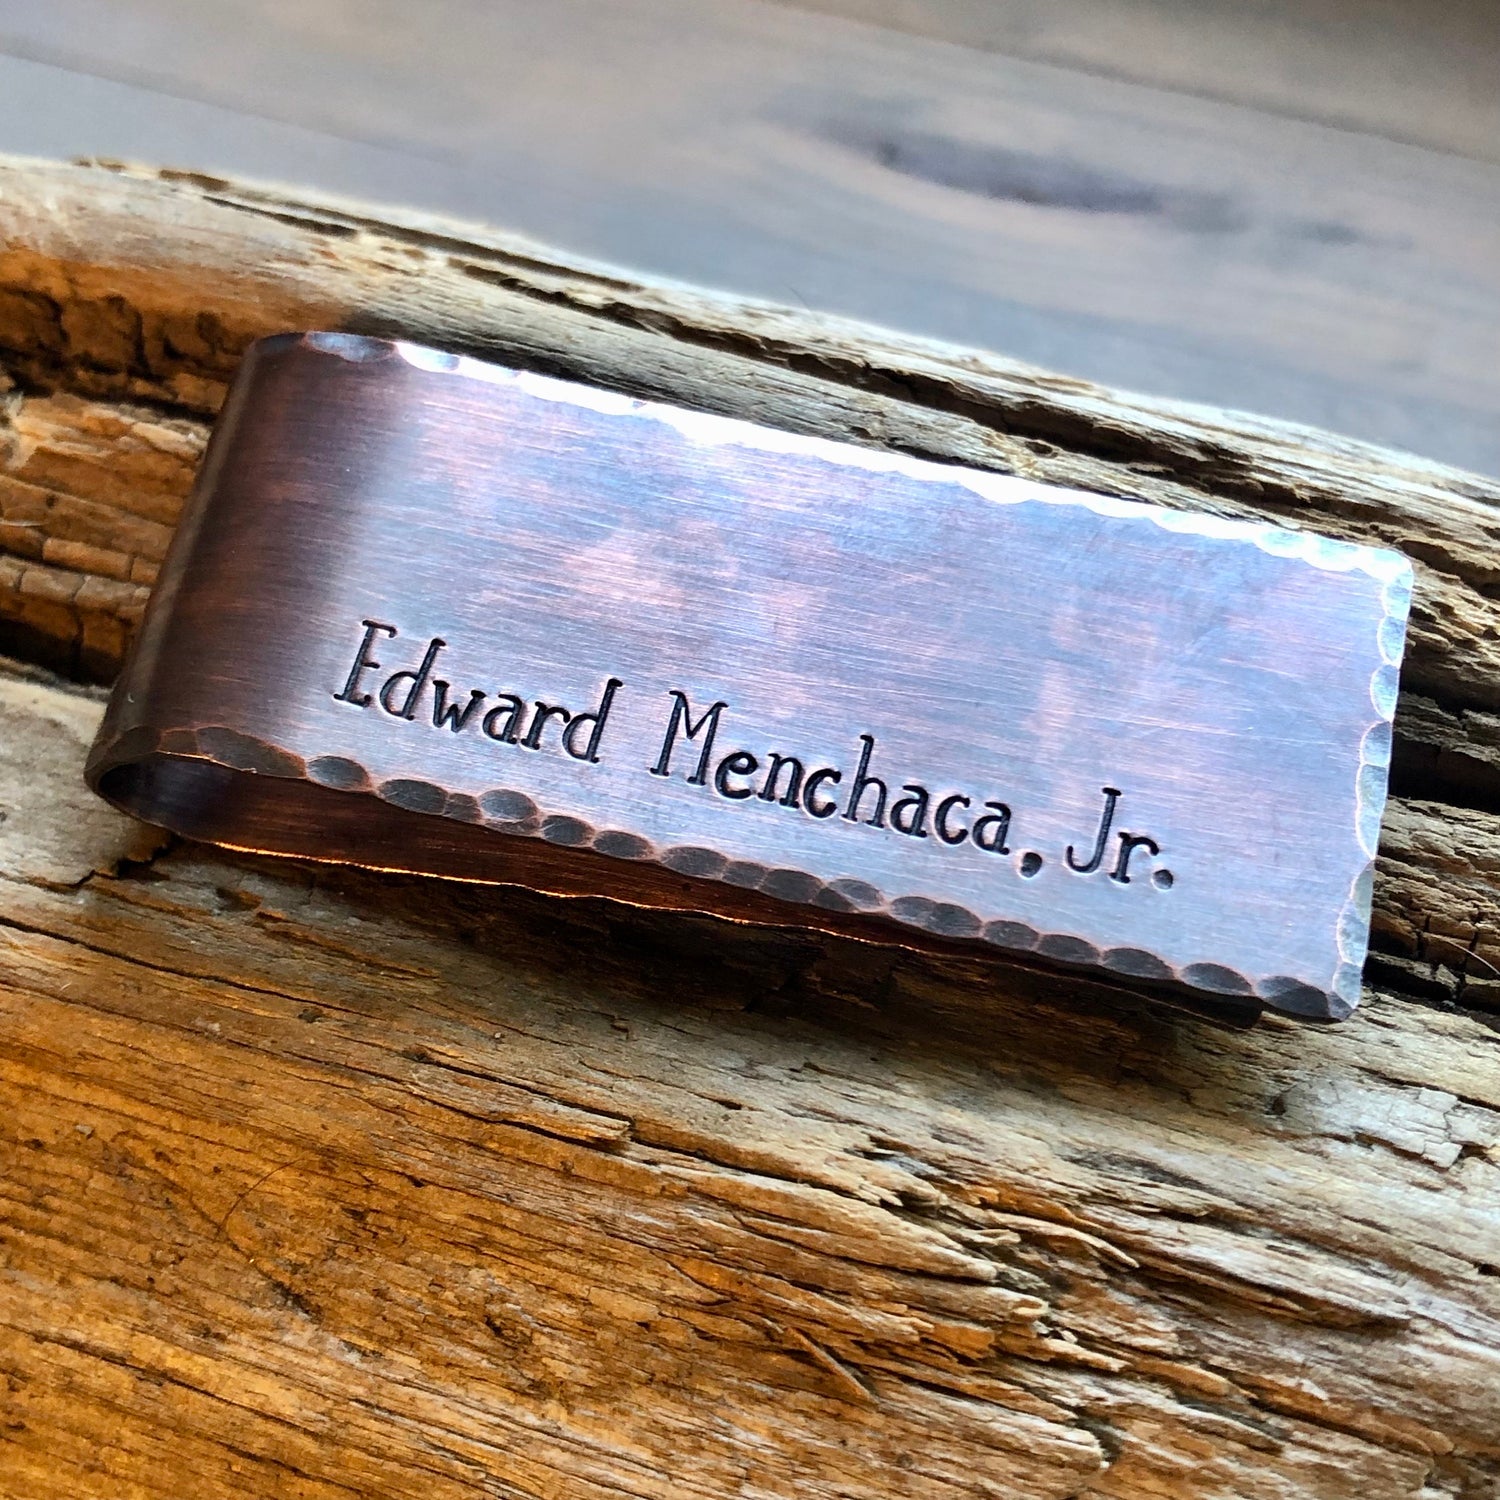 Groomsmen Gift, Gift for Best Man, Father of the Bride, Father of the Groom, Money Clips, Father's Day Gift, Personalized, Wallet, Custom